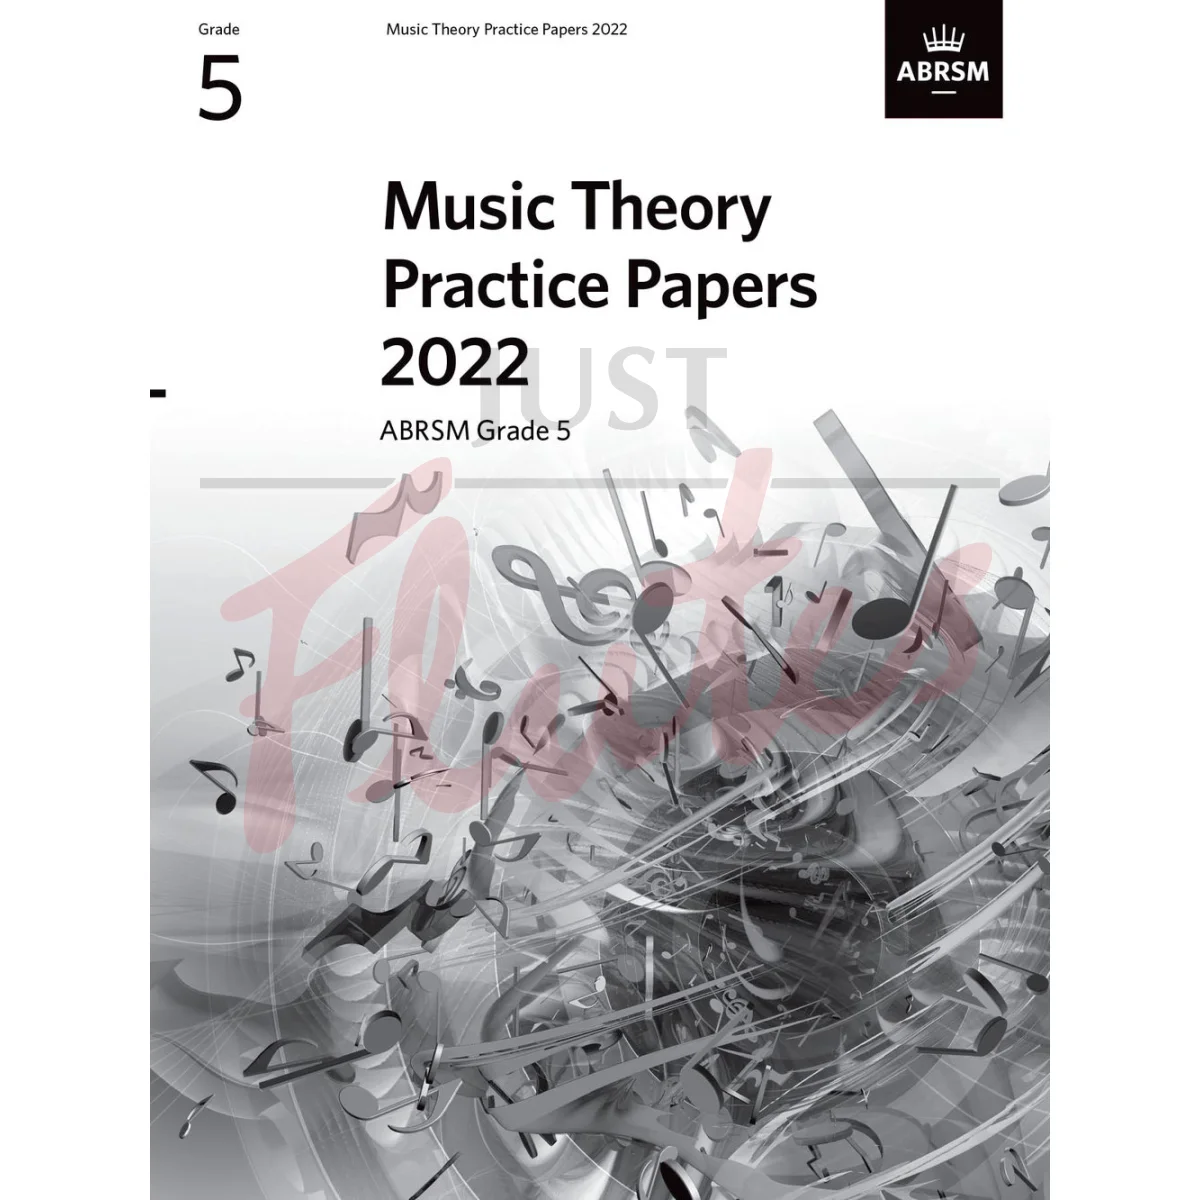 Music Theory Practice Papers 2022 Grade 5